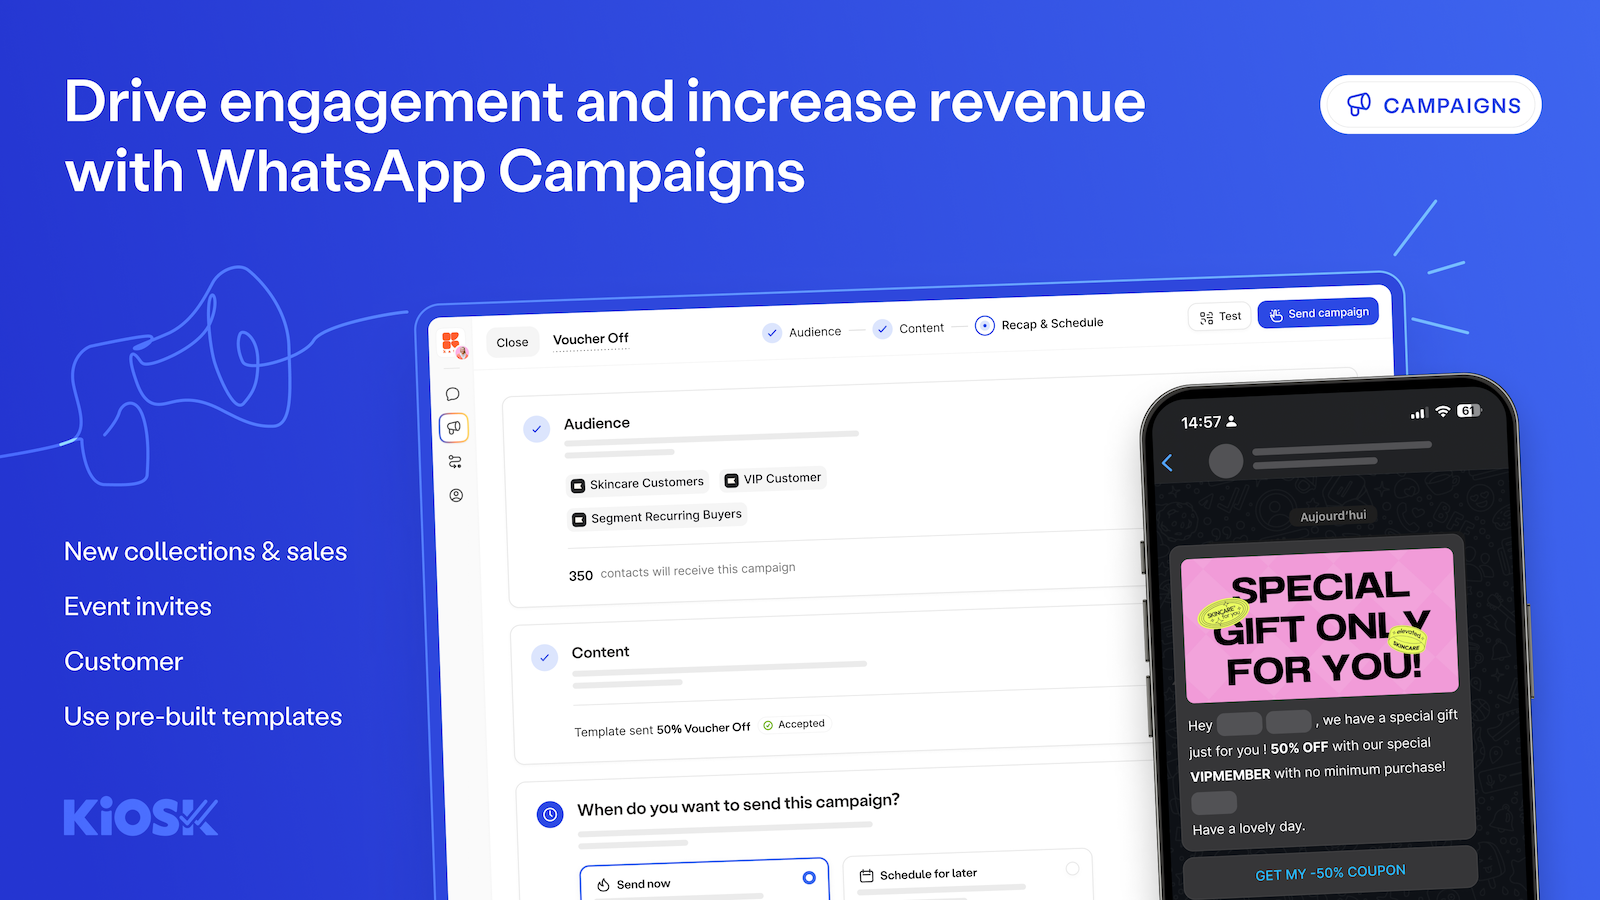 Drive engagement and revenue with WhatsApp Campaigns